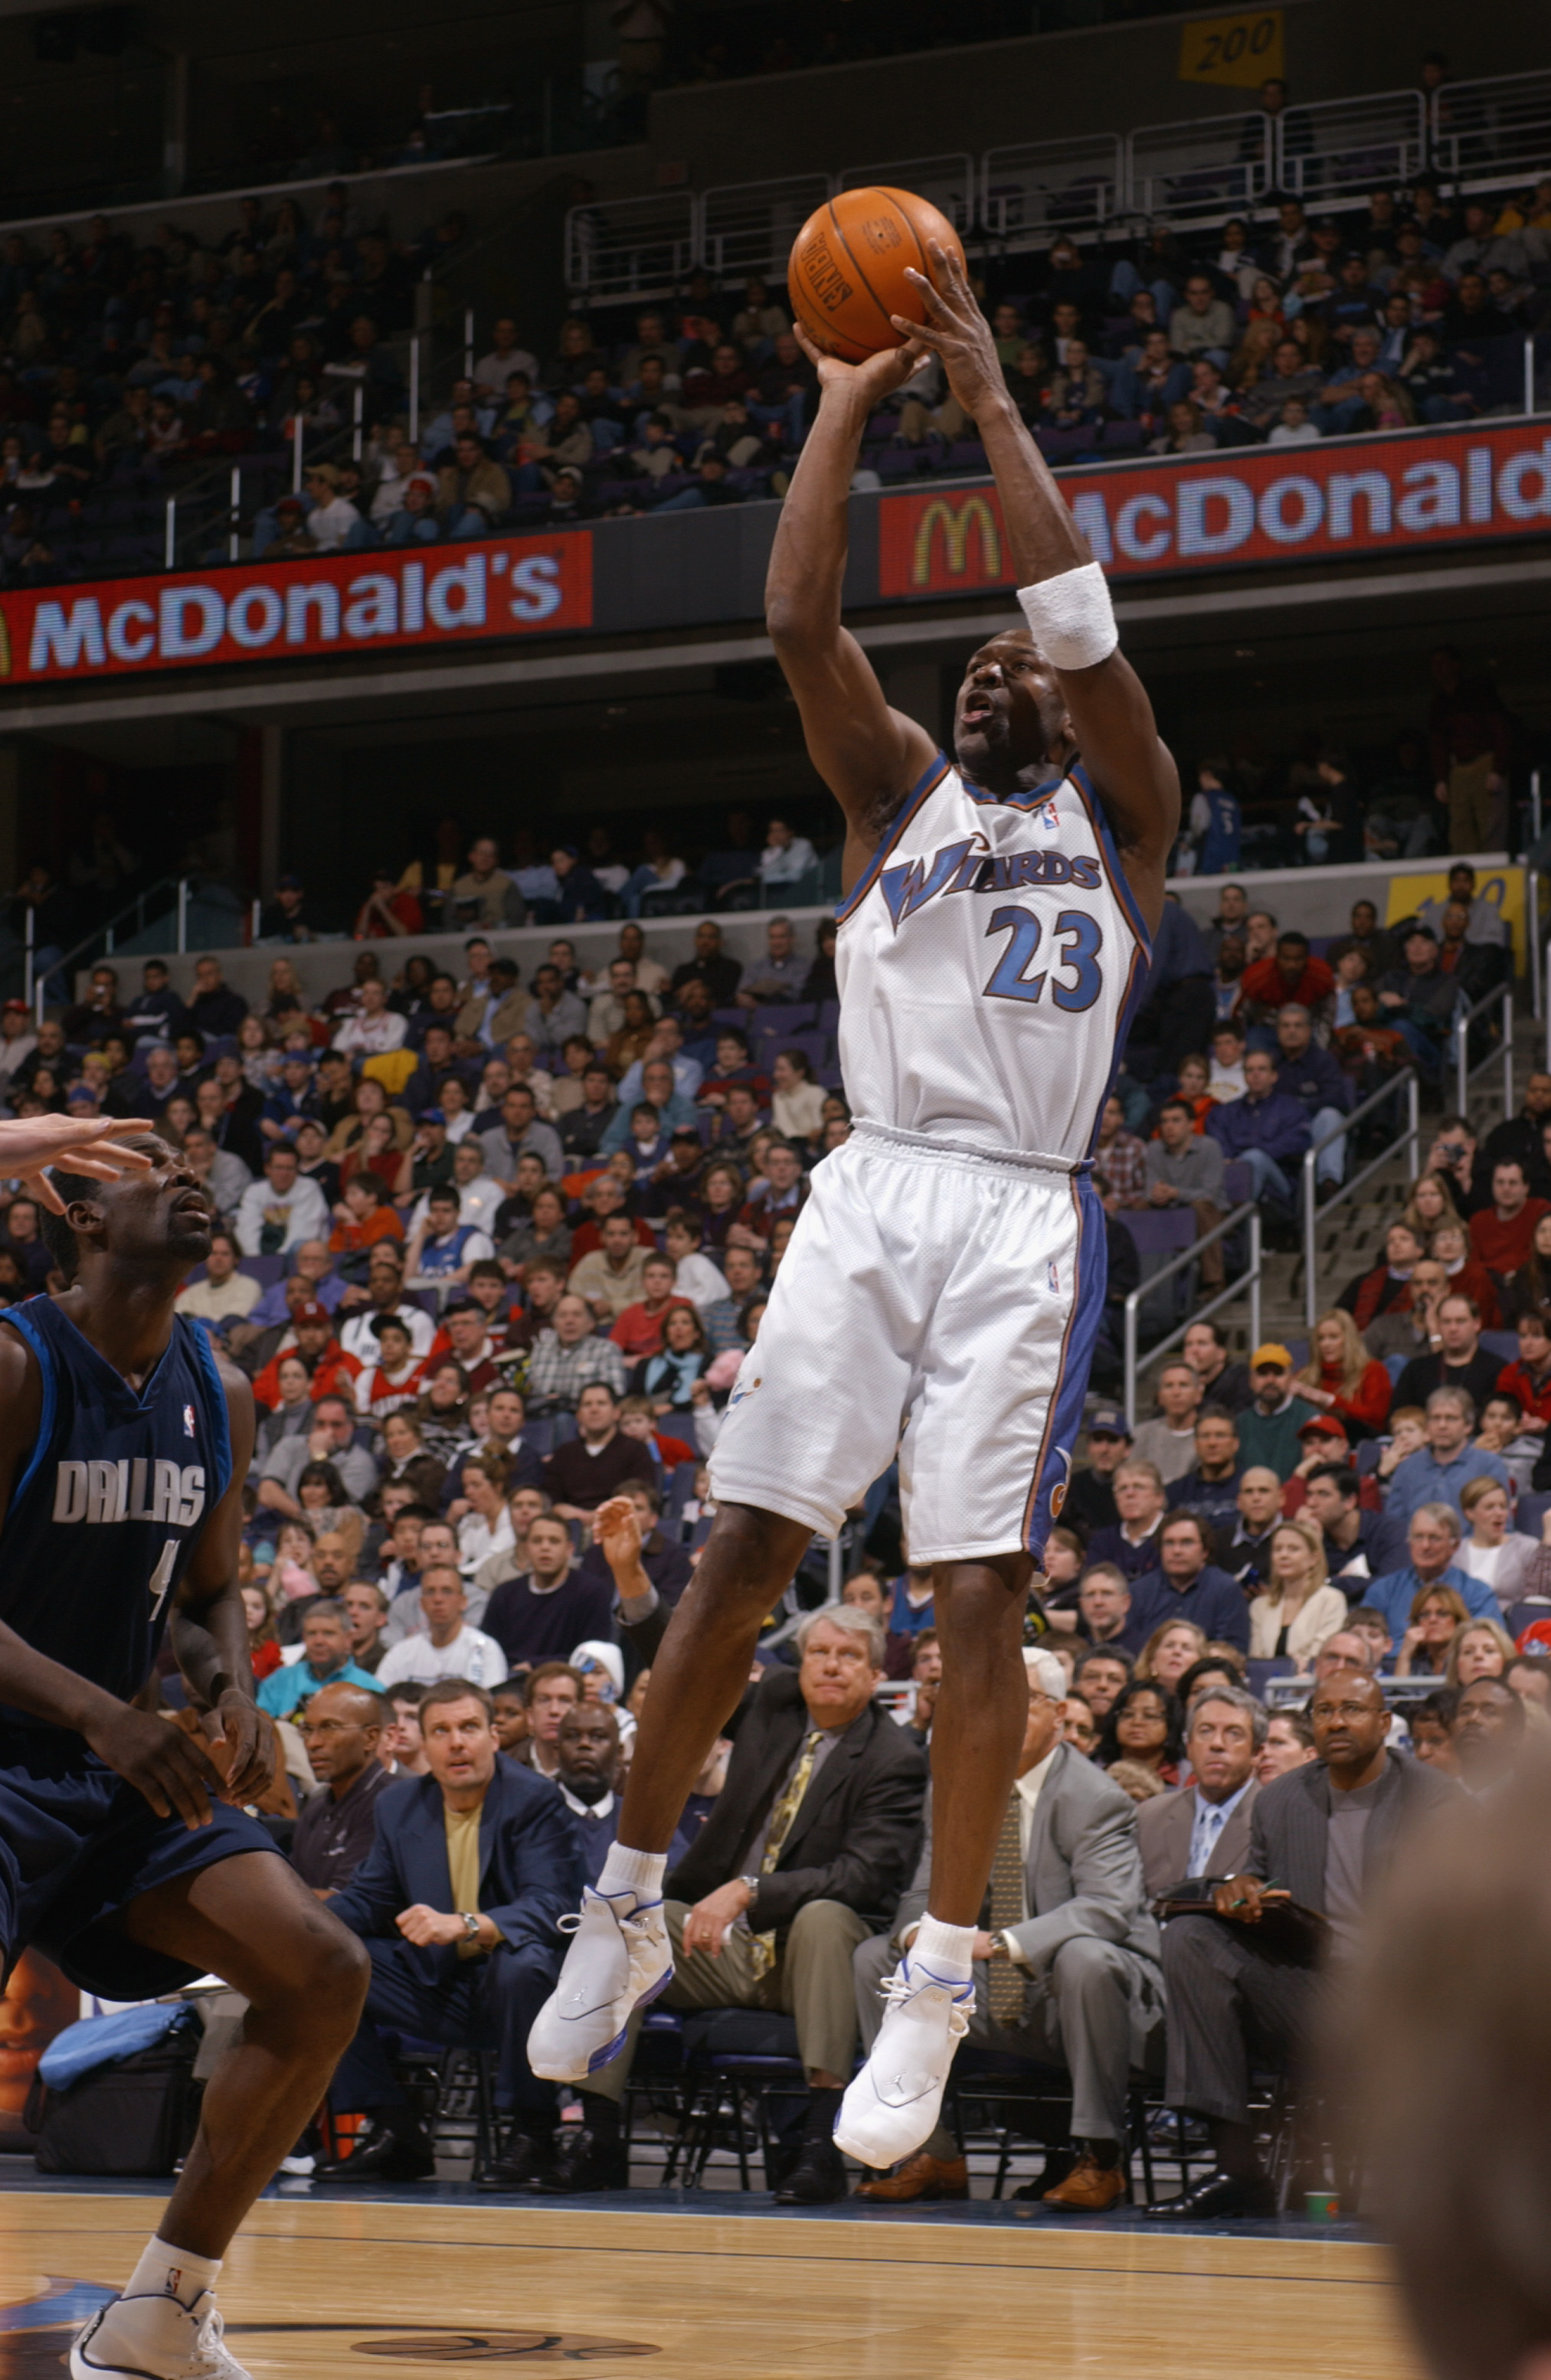 WASHINGTON - FEBRUARY 23:  Michael Jordan #23 of the Washington Wizards shoots against the Dallas Mavericks during the NBA game at MCI Center on February 23, 2003 in Washington, D.C.  The Mavericks won in overtime 106-101.  NOTE TO USER: User expressly ac